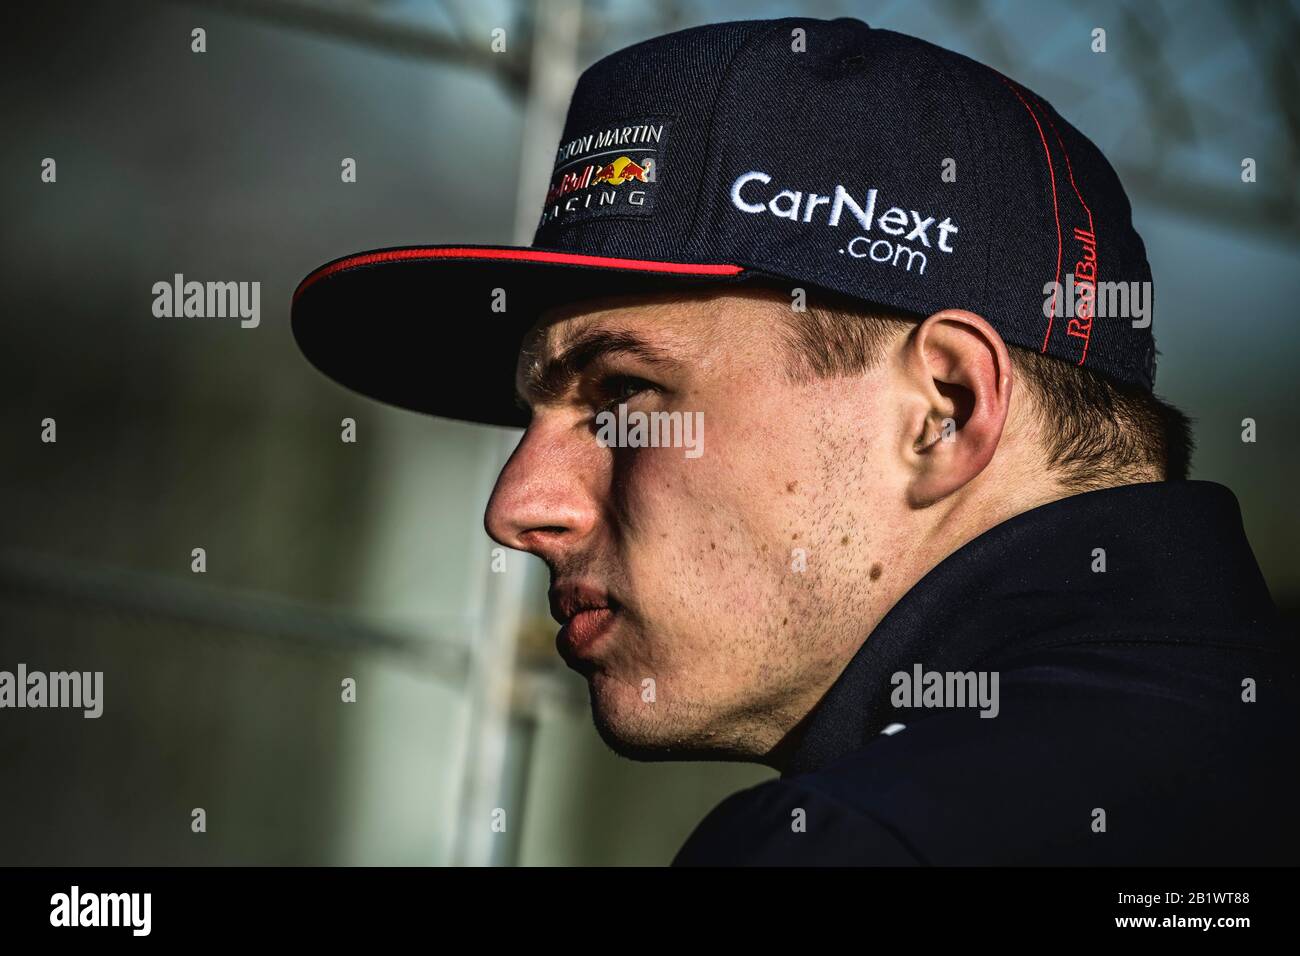 Barcelona, Spain. 27th Feb, 2020. MAX VERSTAPPEN (NED) from team Red Bull Racing observes the training of his team mate and the competition during the afternoon session at day five of the Formula One winter testing at Circuit de Catalunya Credit: Matthias Oesterle/Alamy Live News Stock Photo